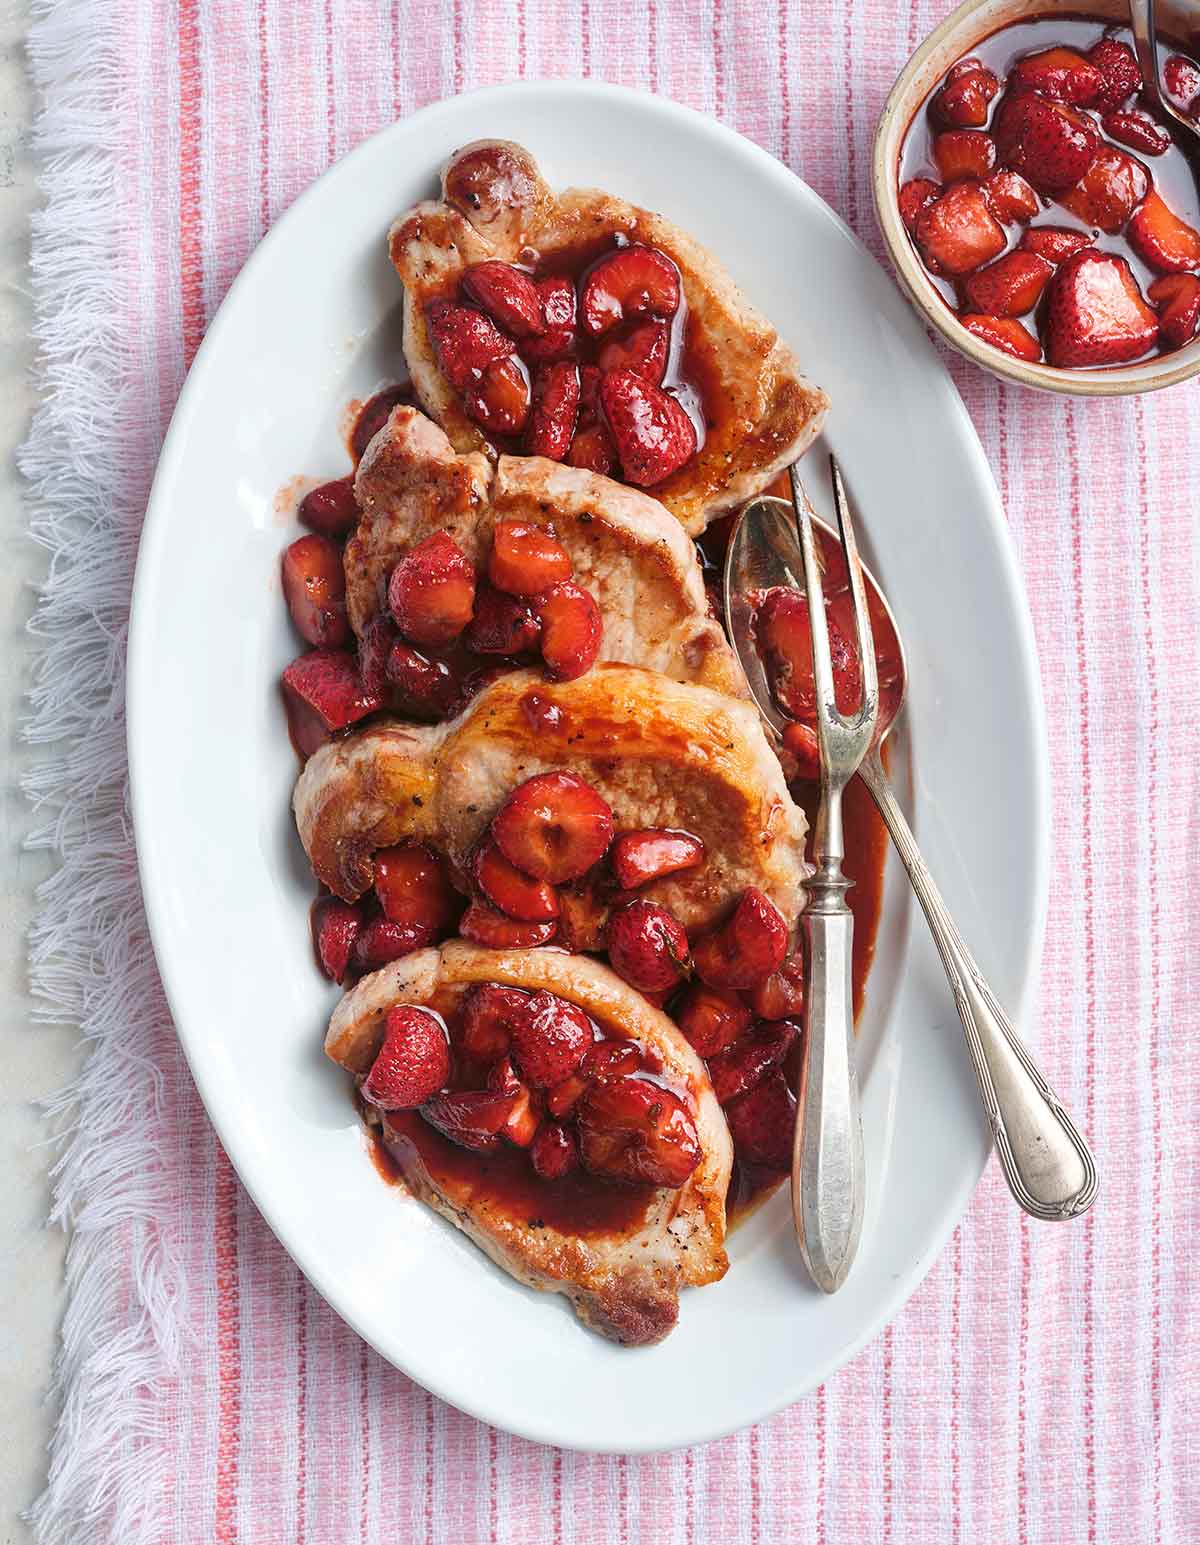 Four pork chops with strawberry balsamic glaze on top arranged on a white oval platter with serving utensils and a bowl of strawberry glaze on the side.